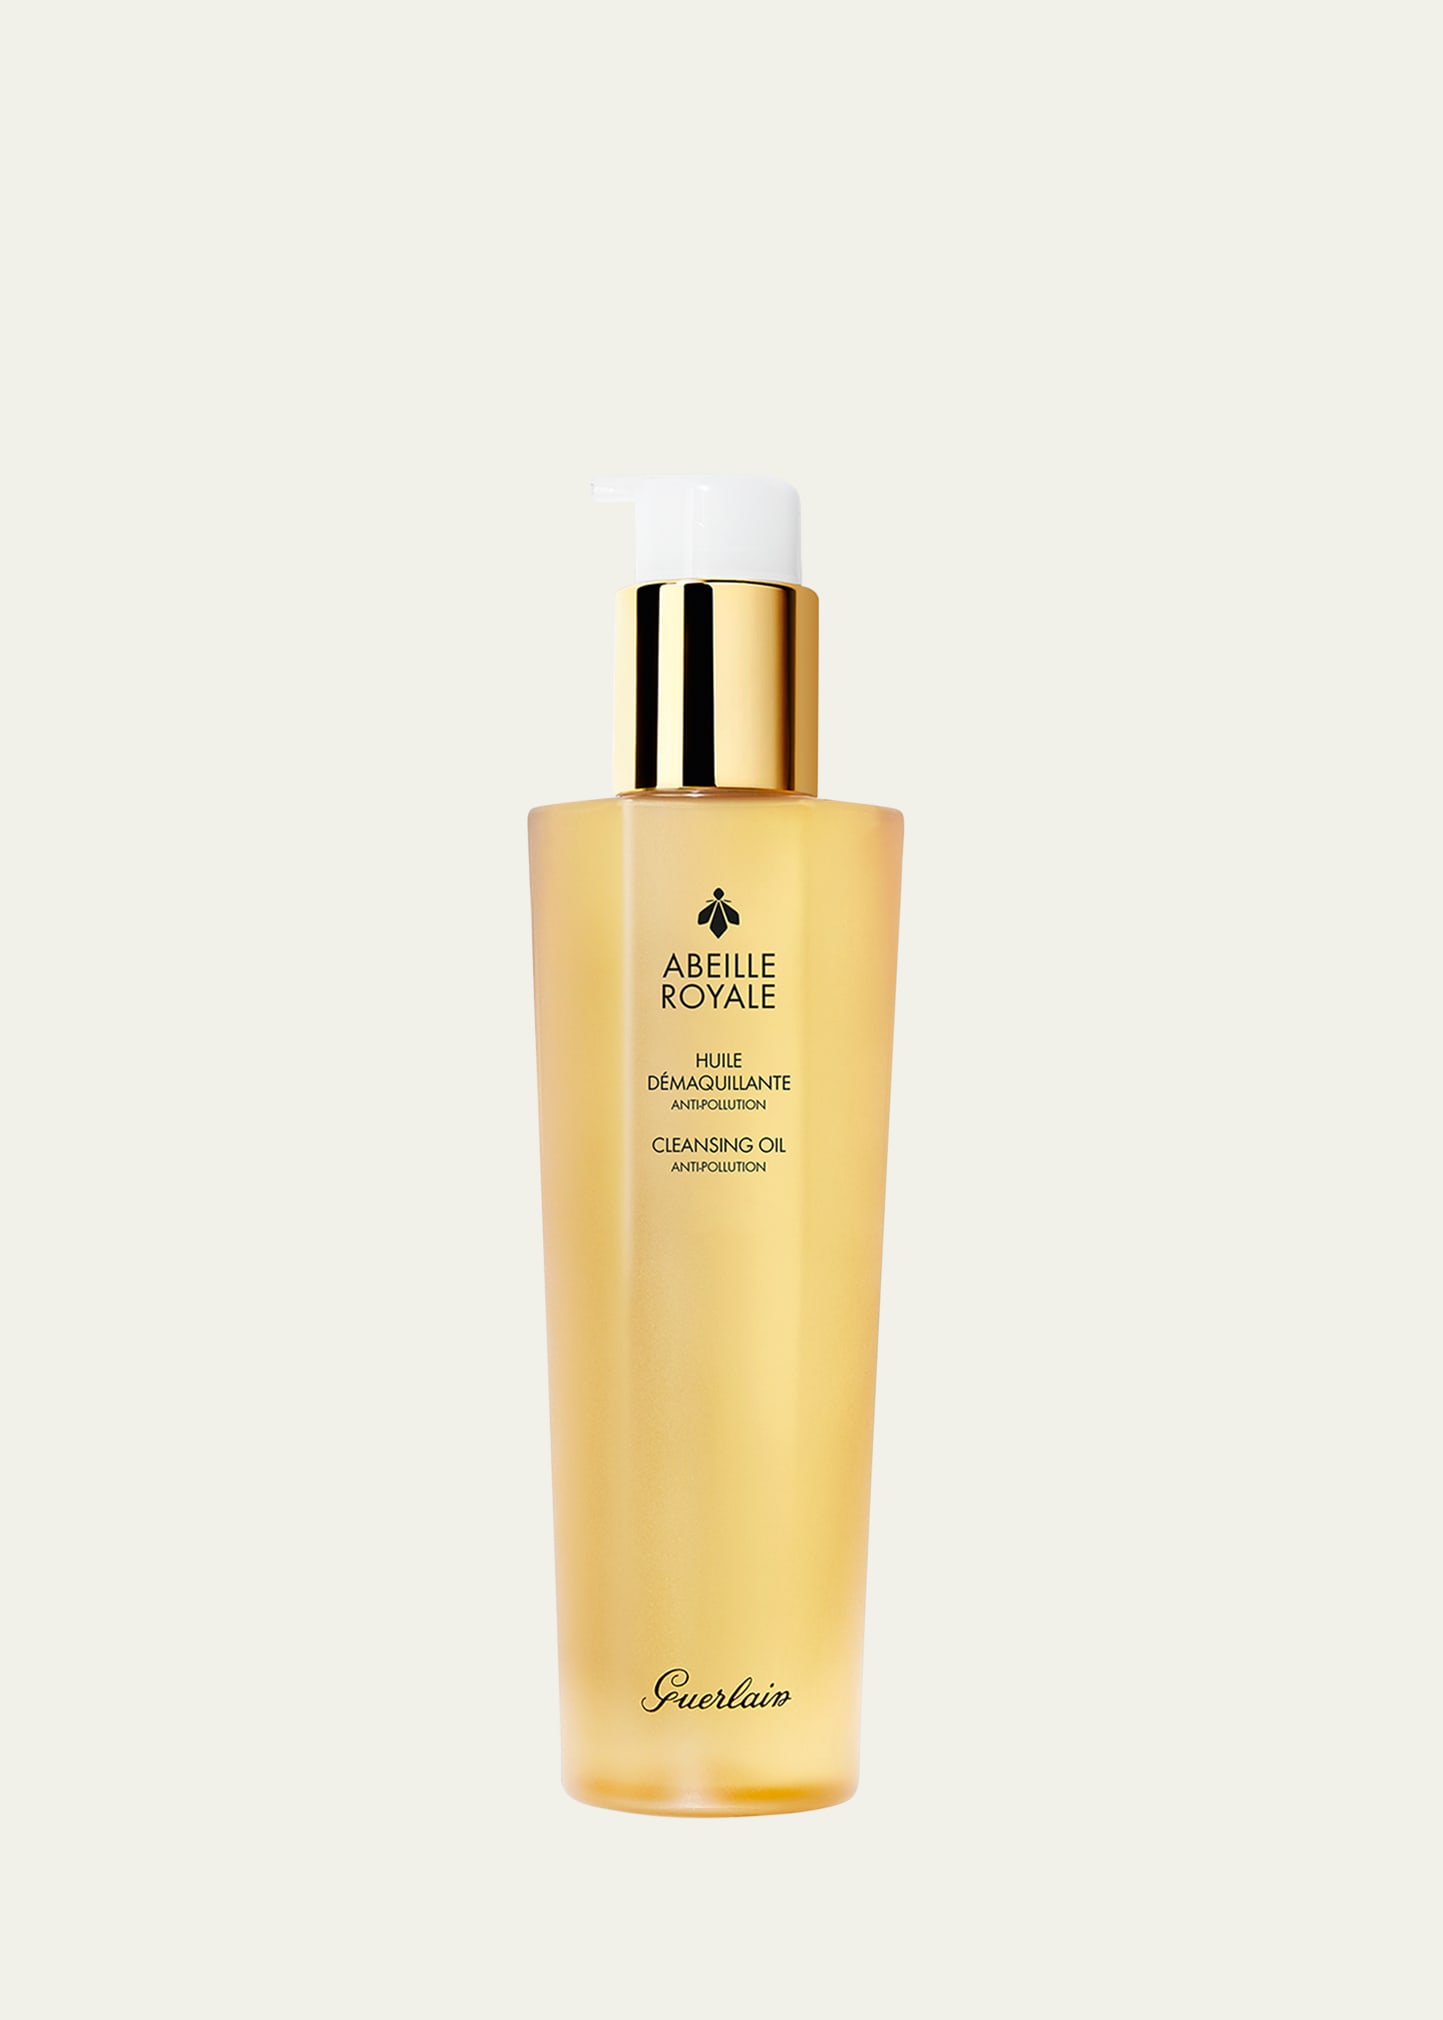 Abeille Royale Anti-Pollution Cleansing Oil, 5 oz.